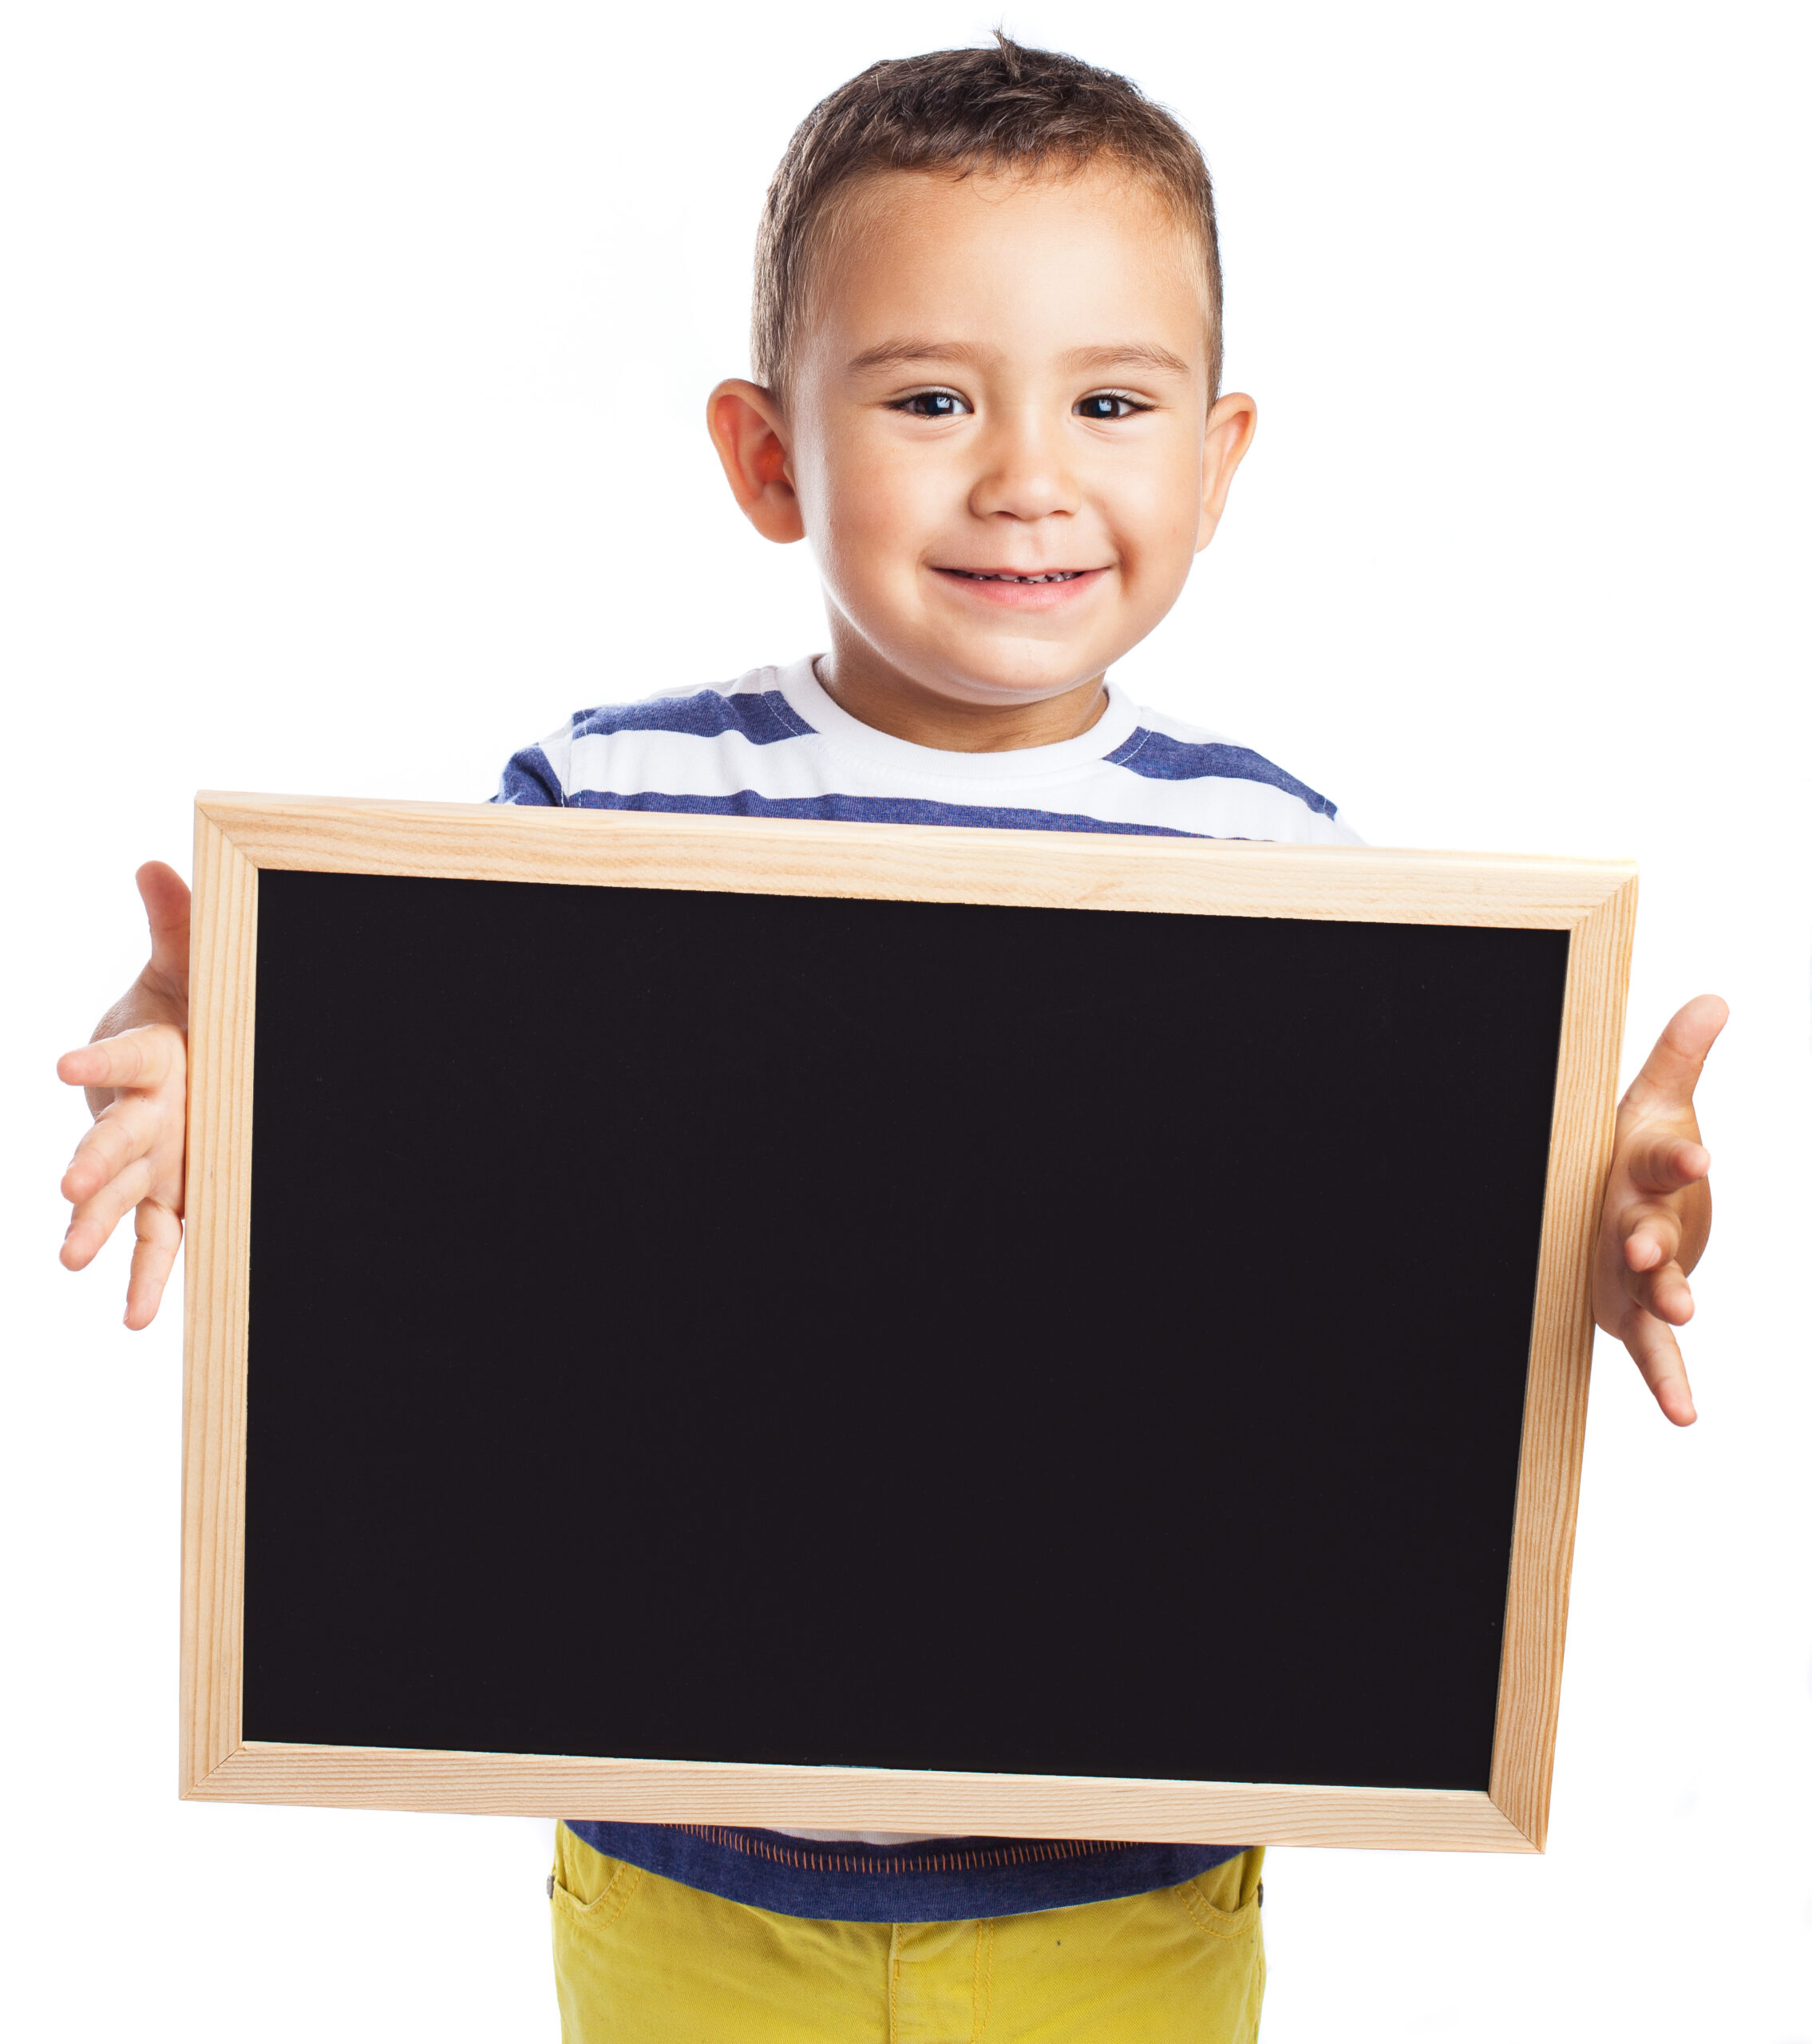 child holding a chalkboard on white background